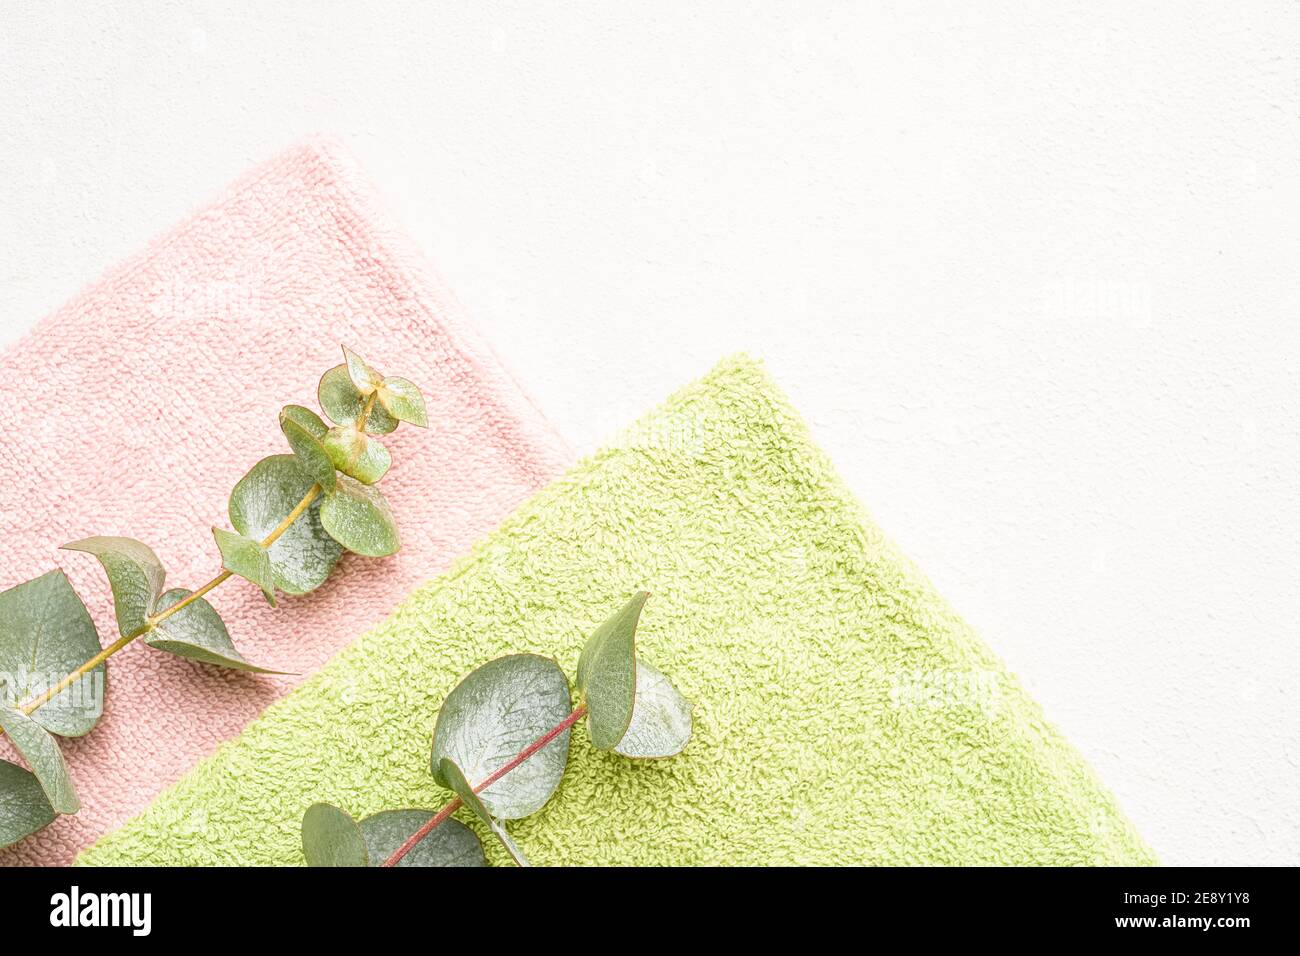 https://c8.alamy.com/comp/2E8Y1Y8/rolled-towels-and-green-eucalyptus-branches-on-white-concrete-background-minimalist-scandinavian-style-spa-hygiene-wellness-well-being-body-care-2E8Y1Y8.jpg